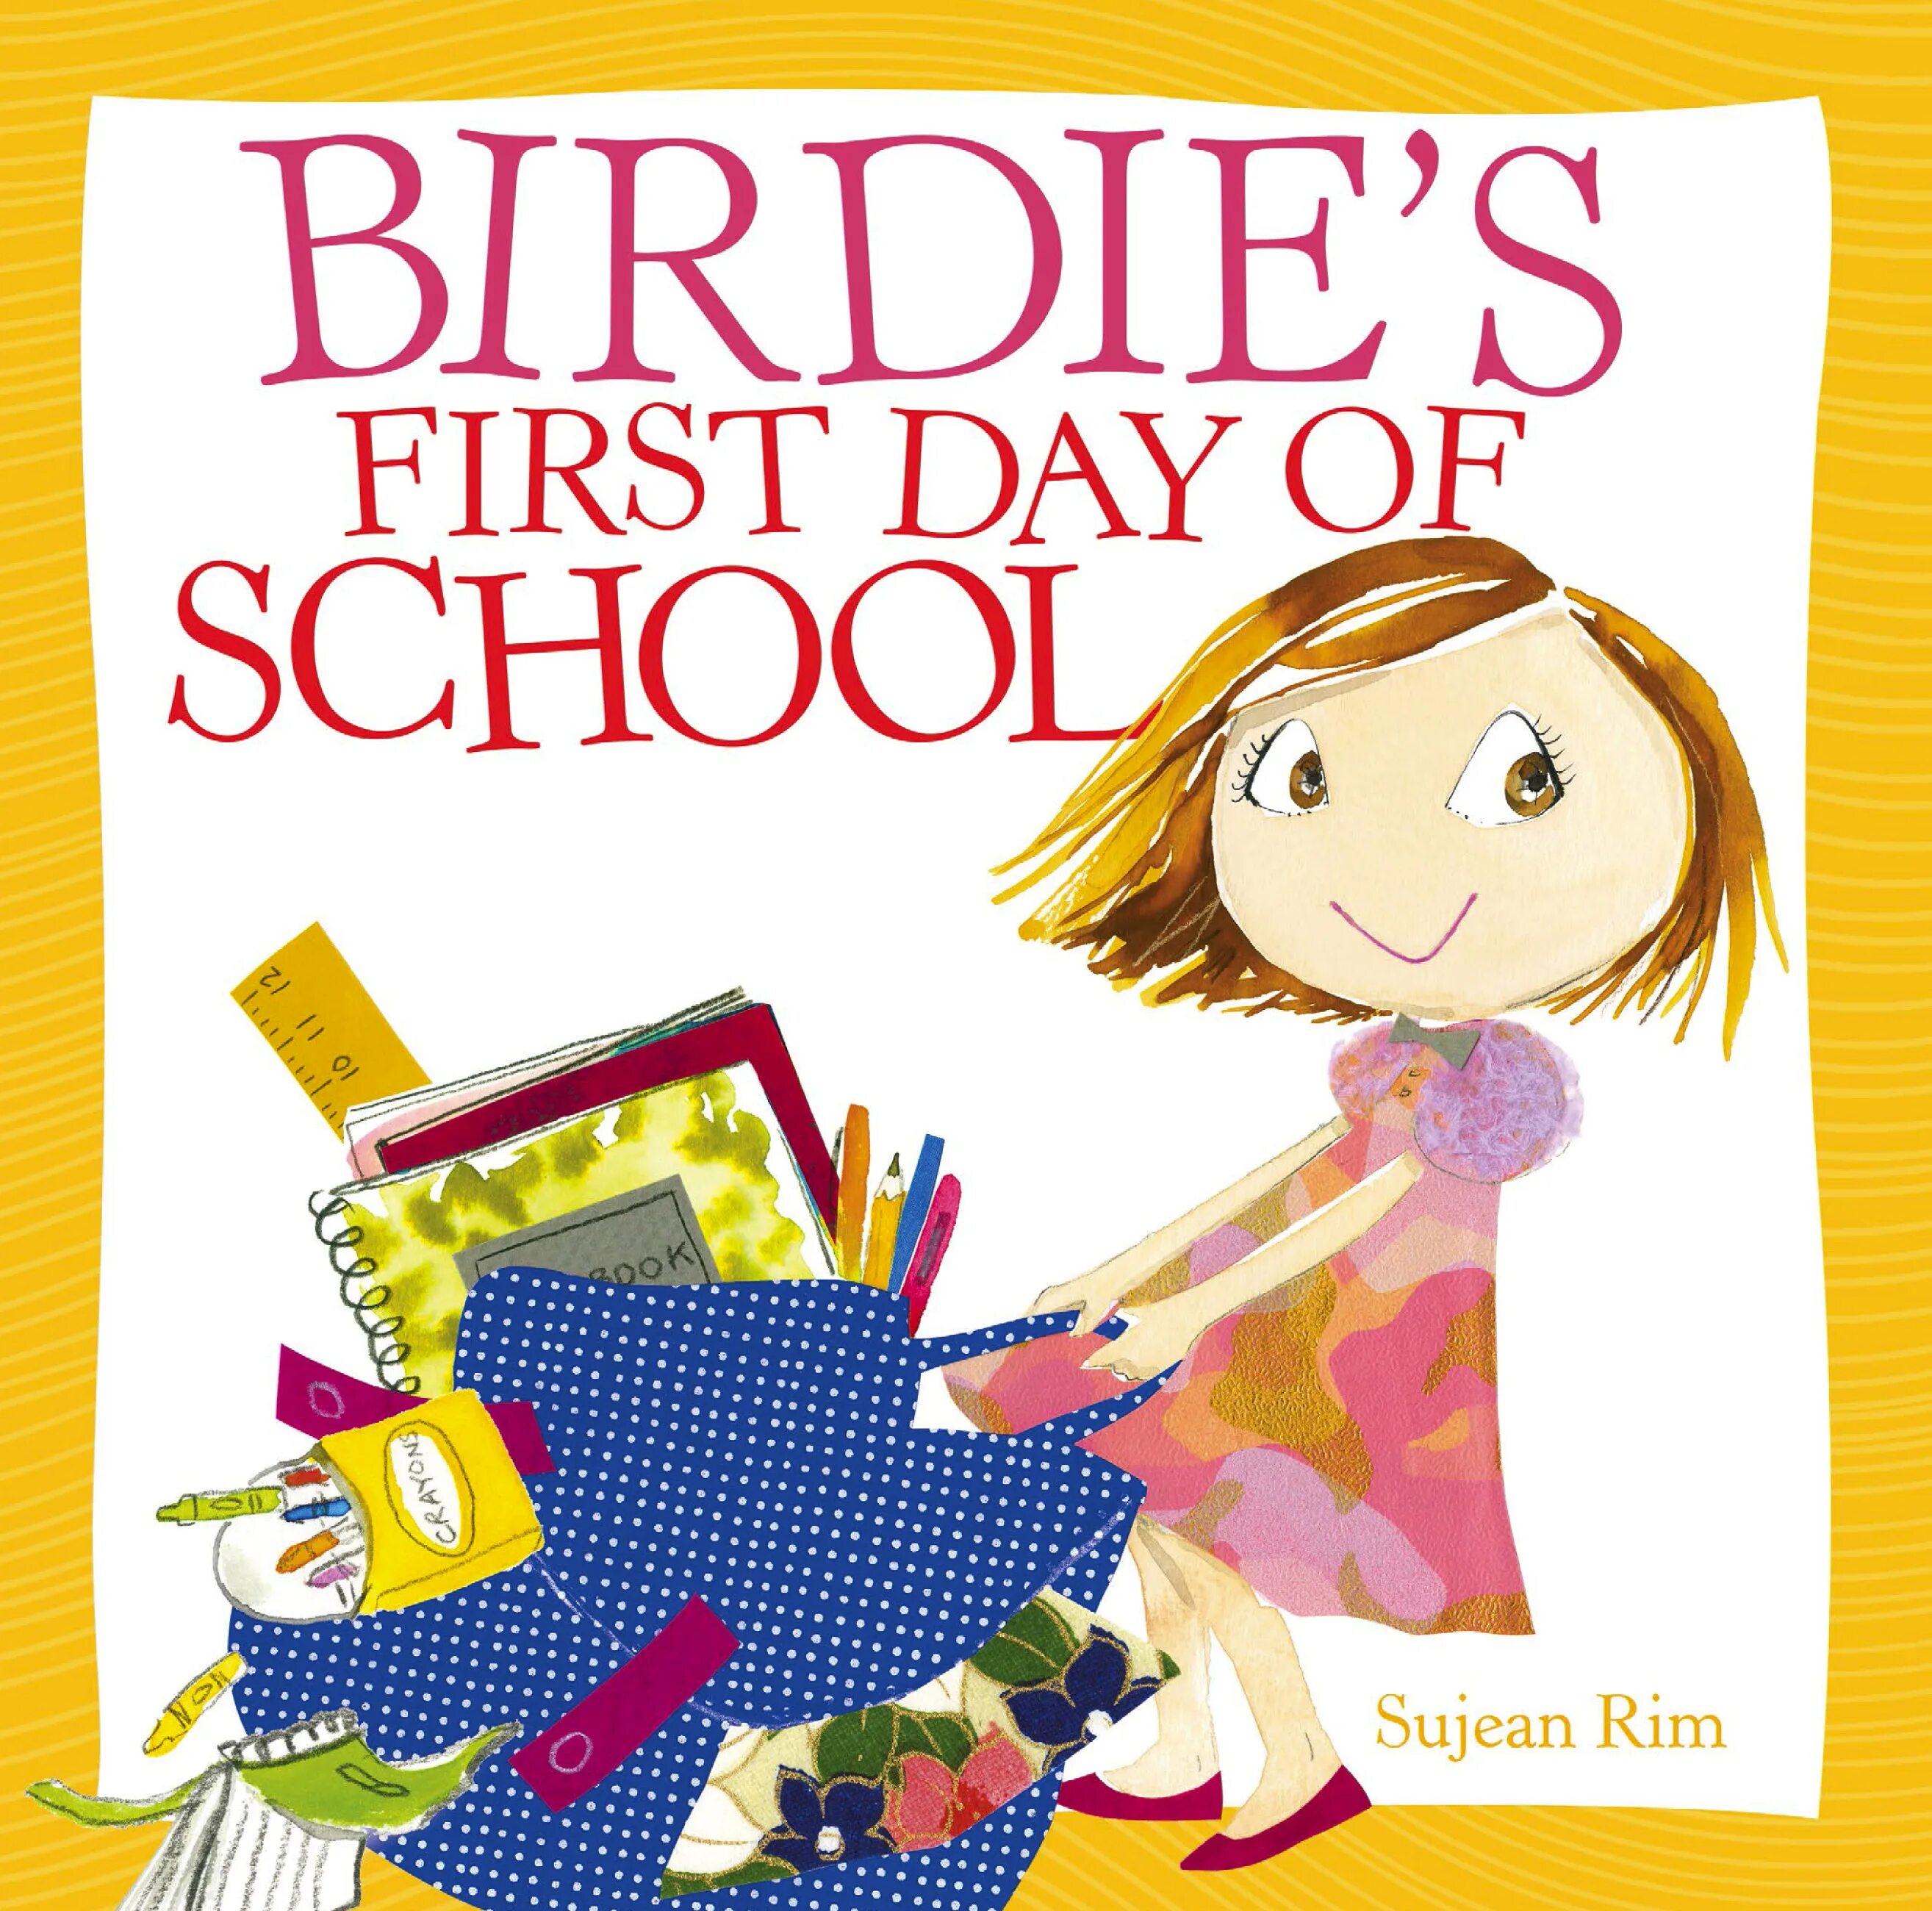 First day school. First Day at School book.